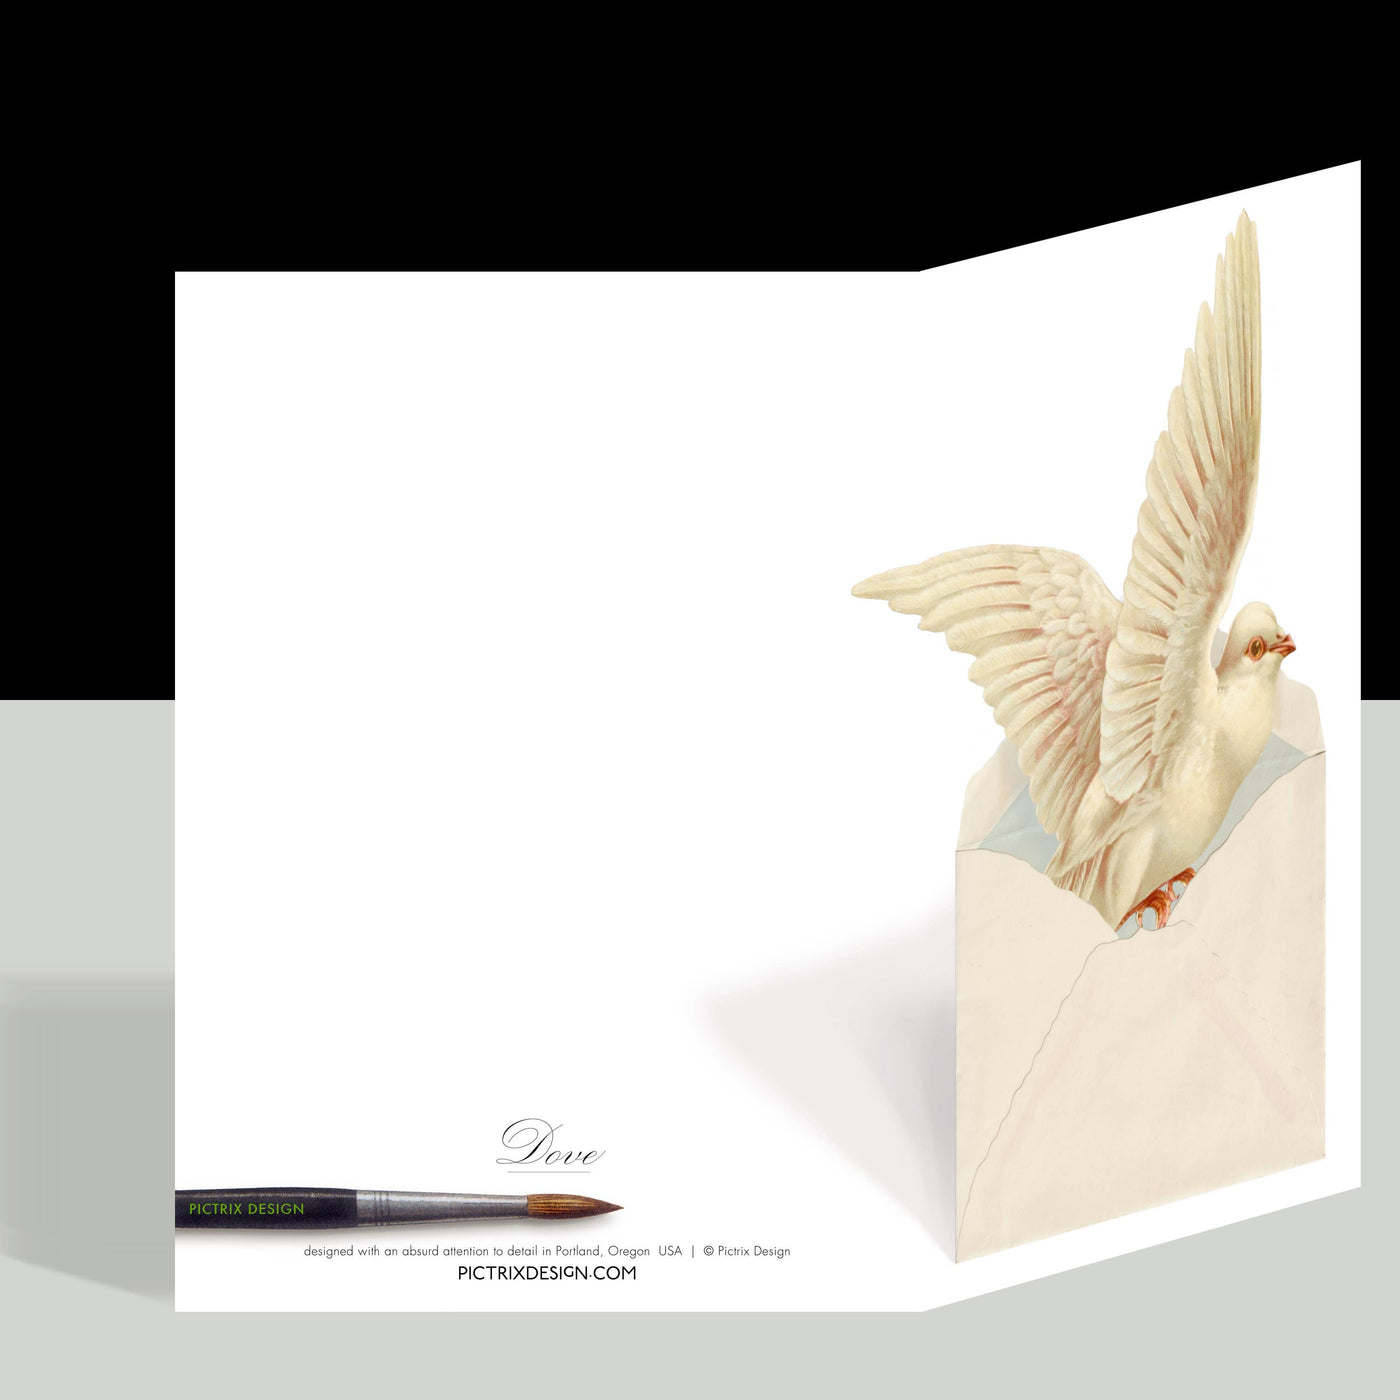 "Dove" A7 greeting card: Recycled white envelopes